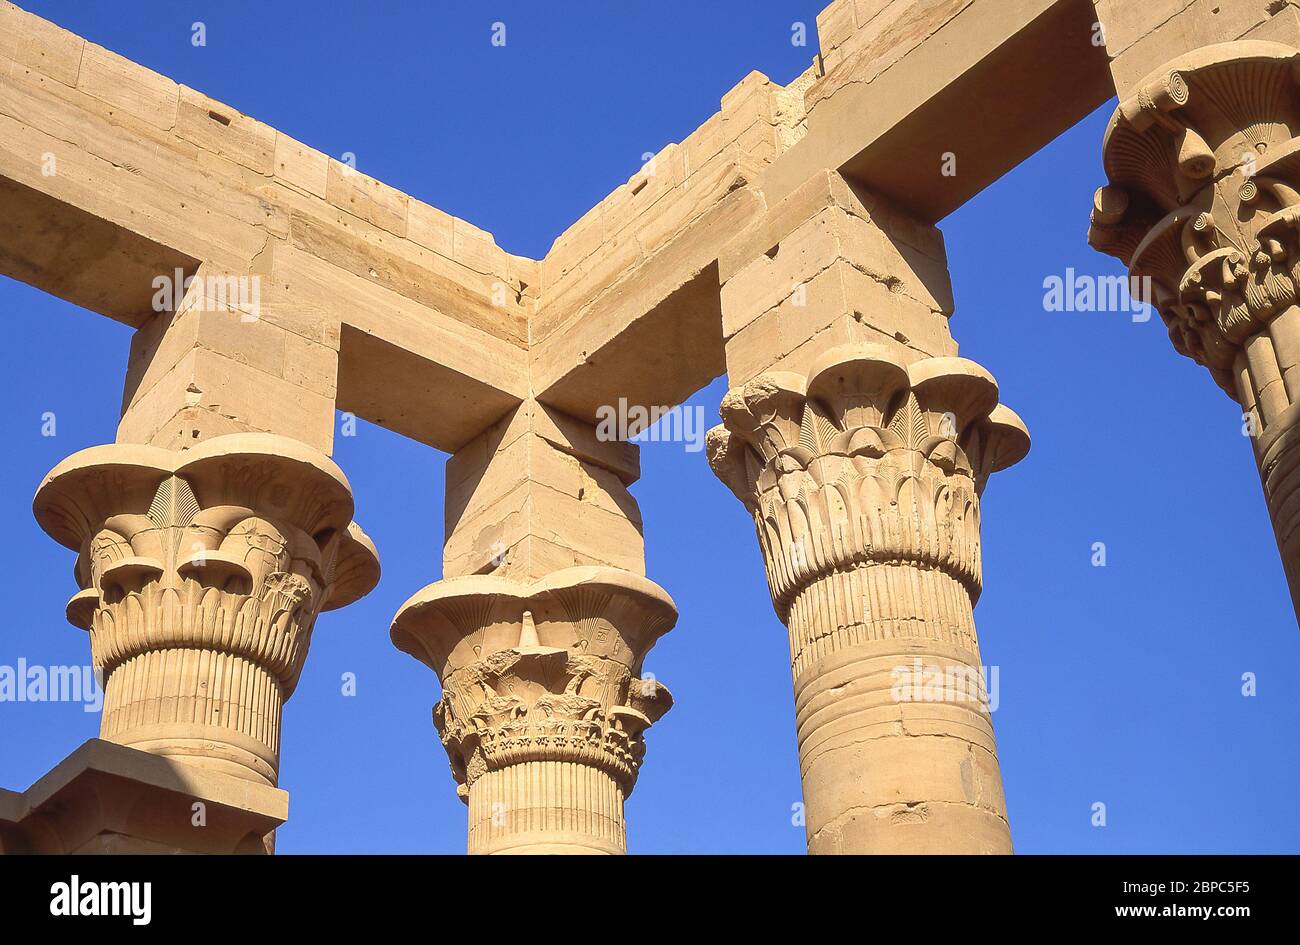 Capitals of east colonnade, The Temple of Isis, Agikia Island, Lake Nasser, Aswan, Aswan Governorate, Republic of Egypt Stock Photo